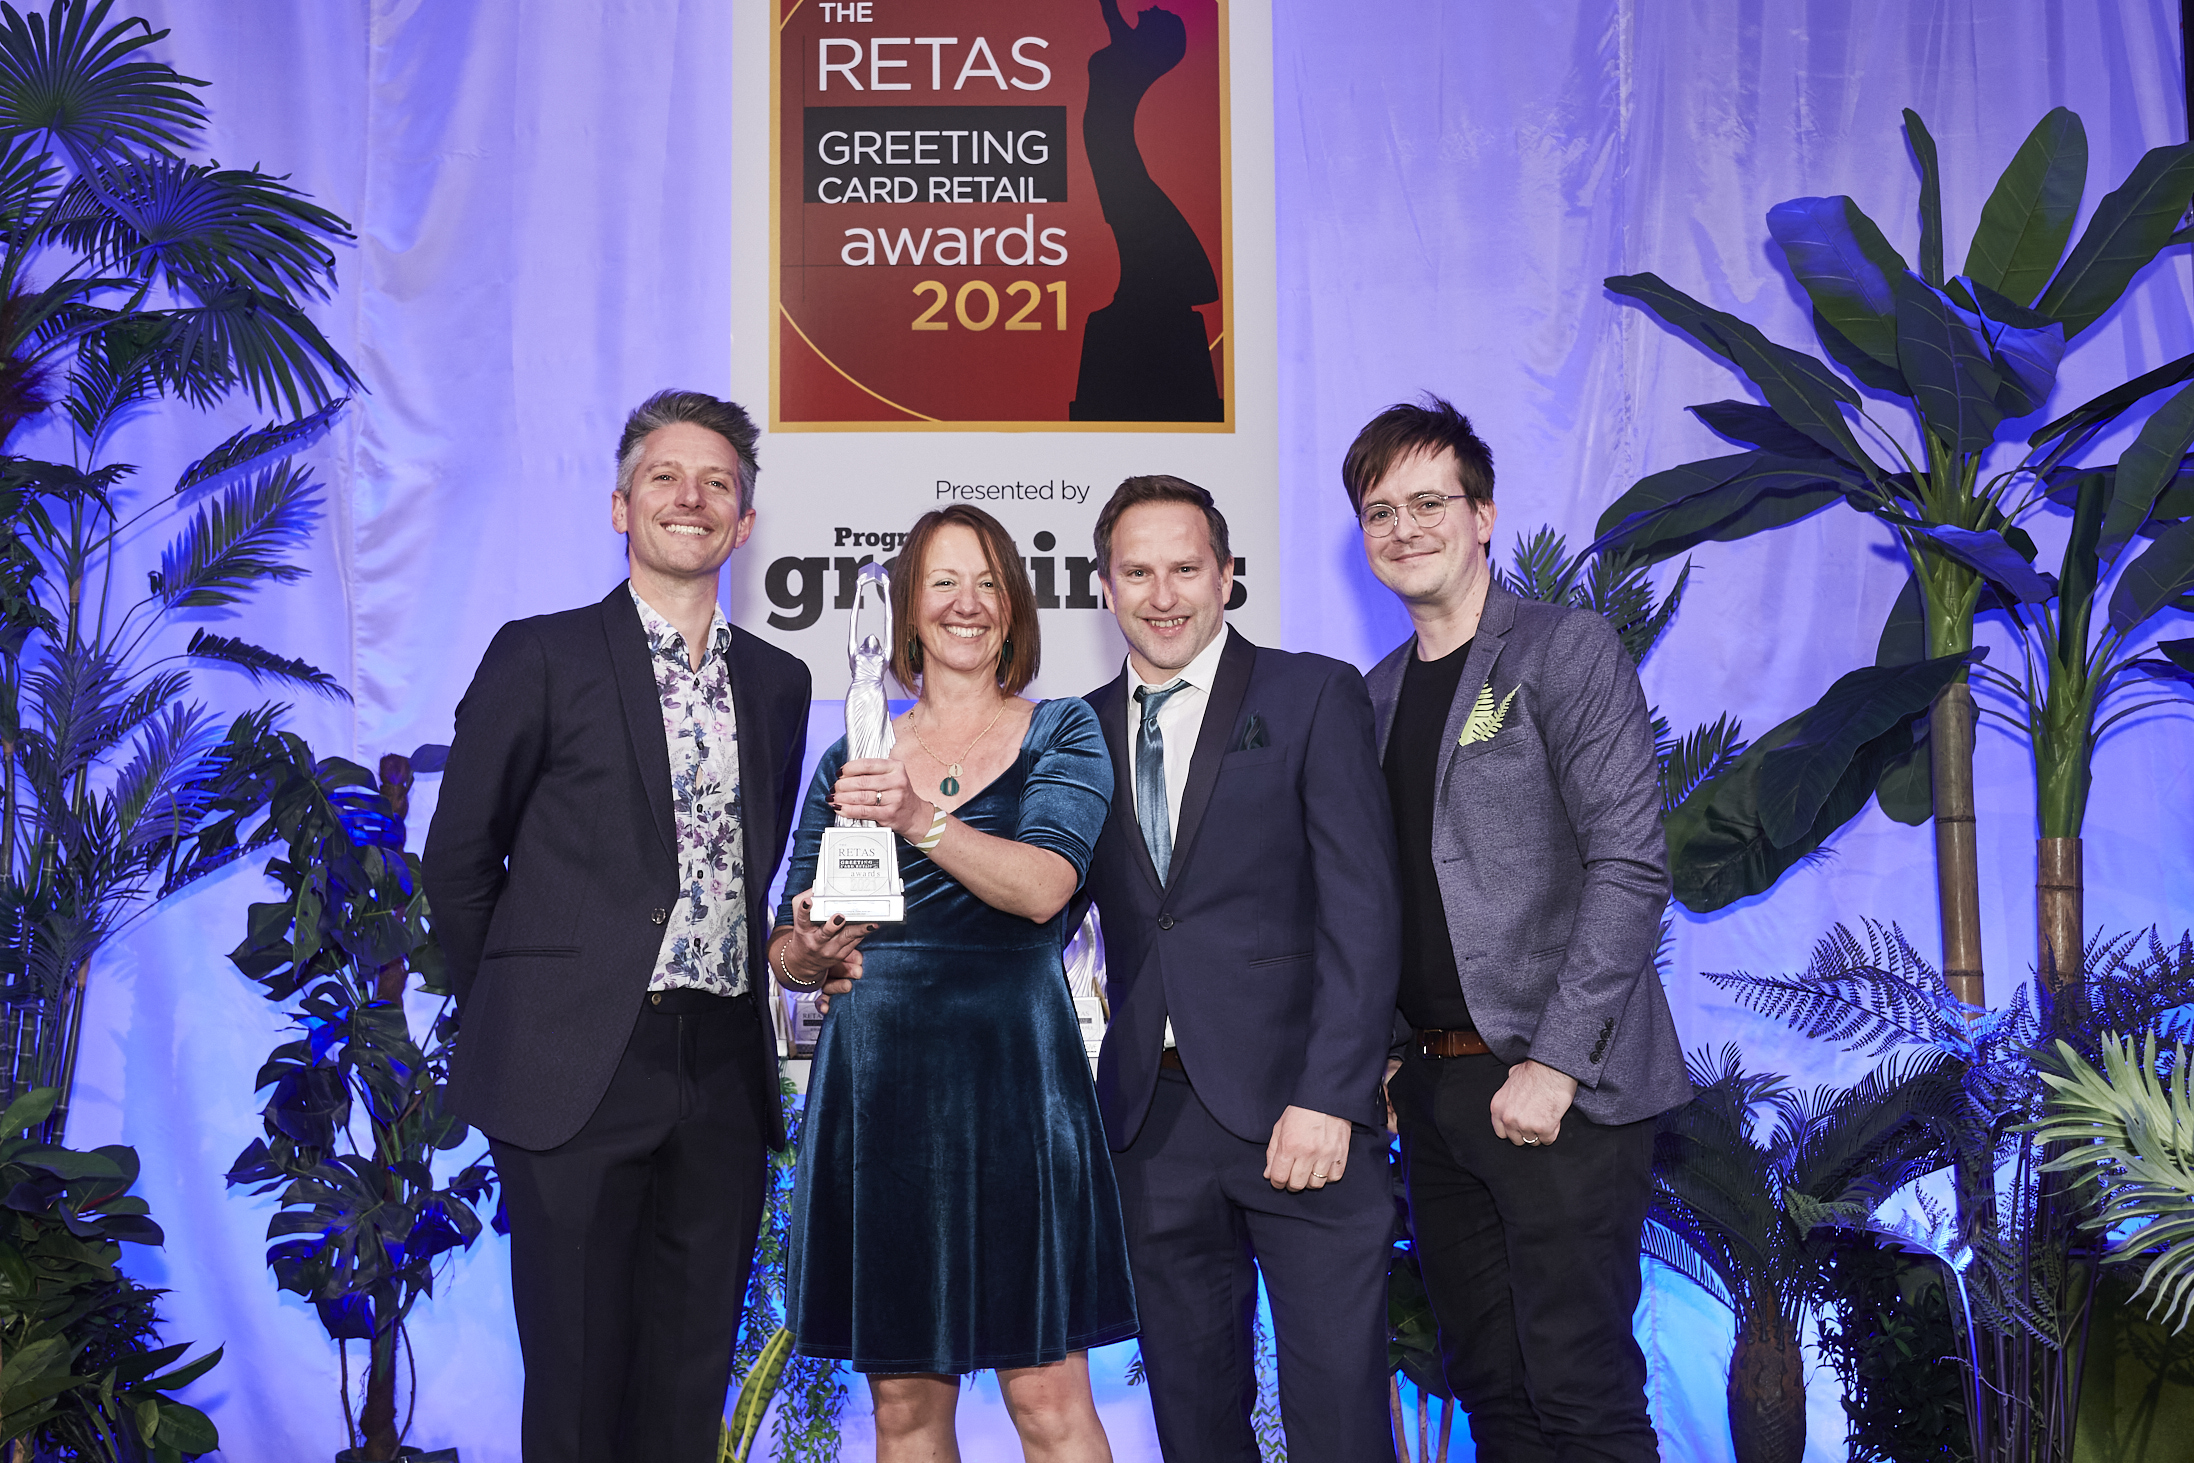 Above: Earlybird’s co-owners Heidi and (second right) Dominic Early with Ohh Deer’s Mark Callaby (far right), sponsor of this award category. Earlybird also won the Best Retail Initiative.